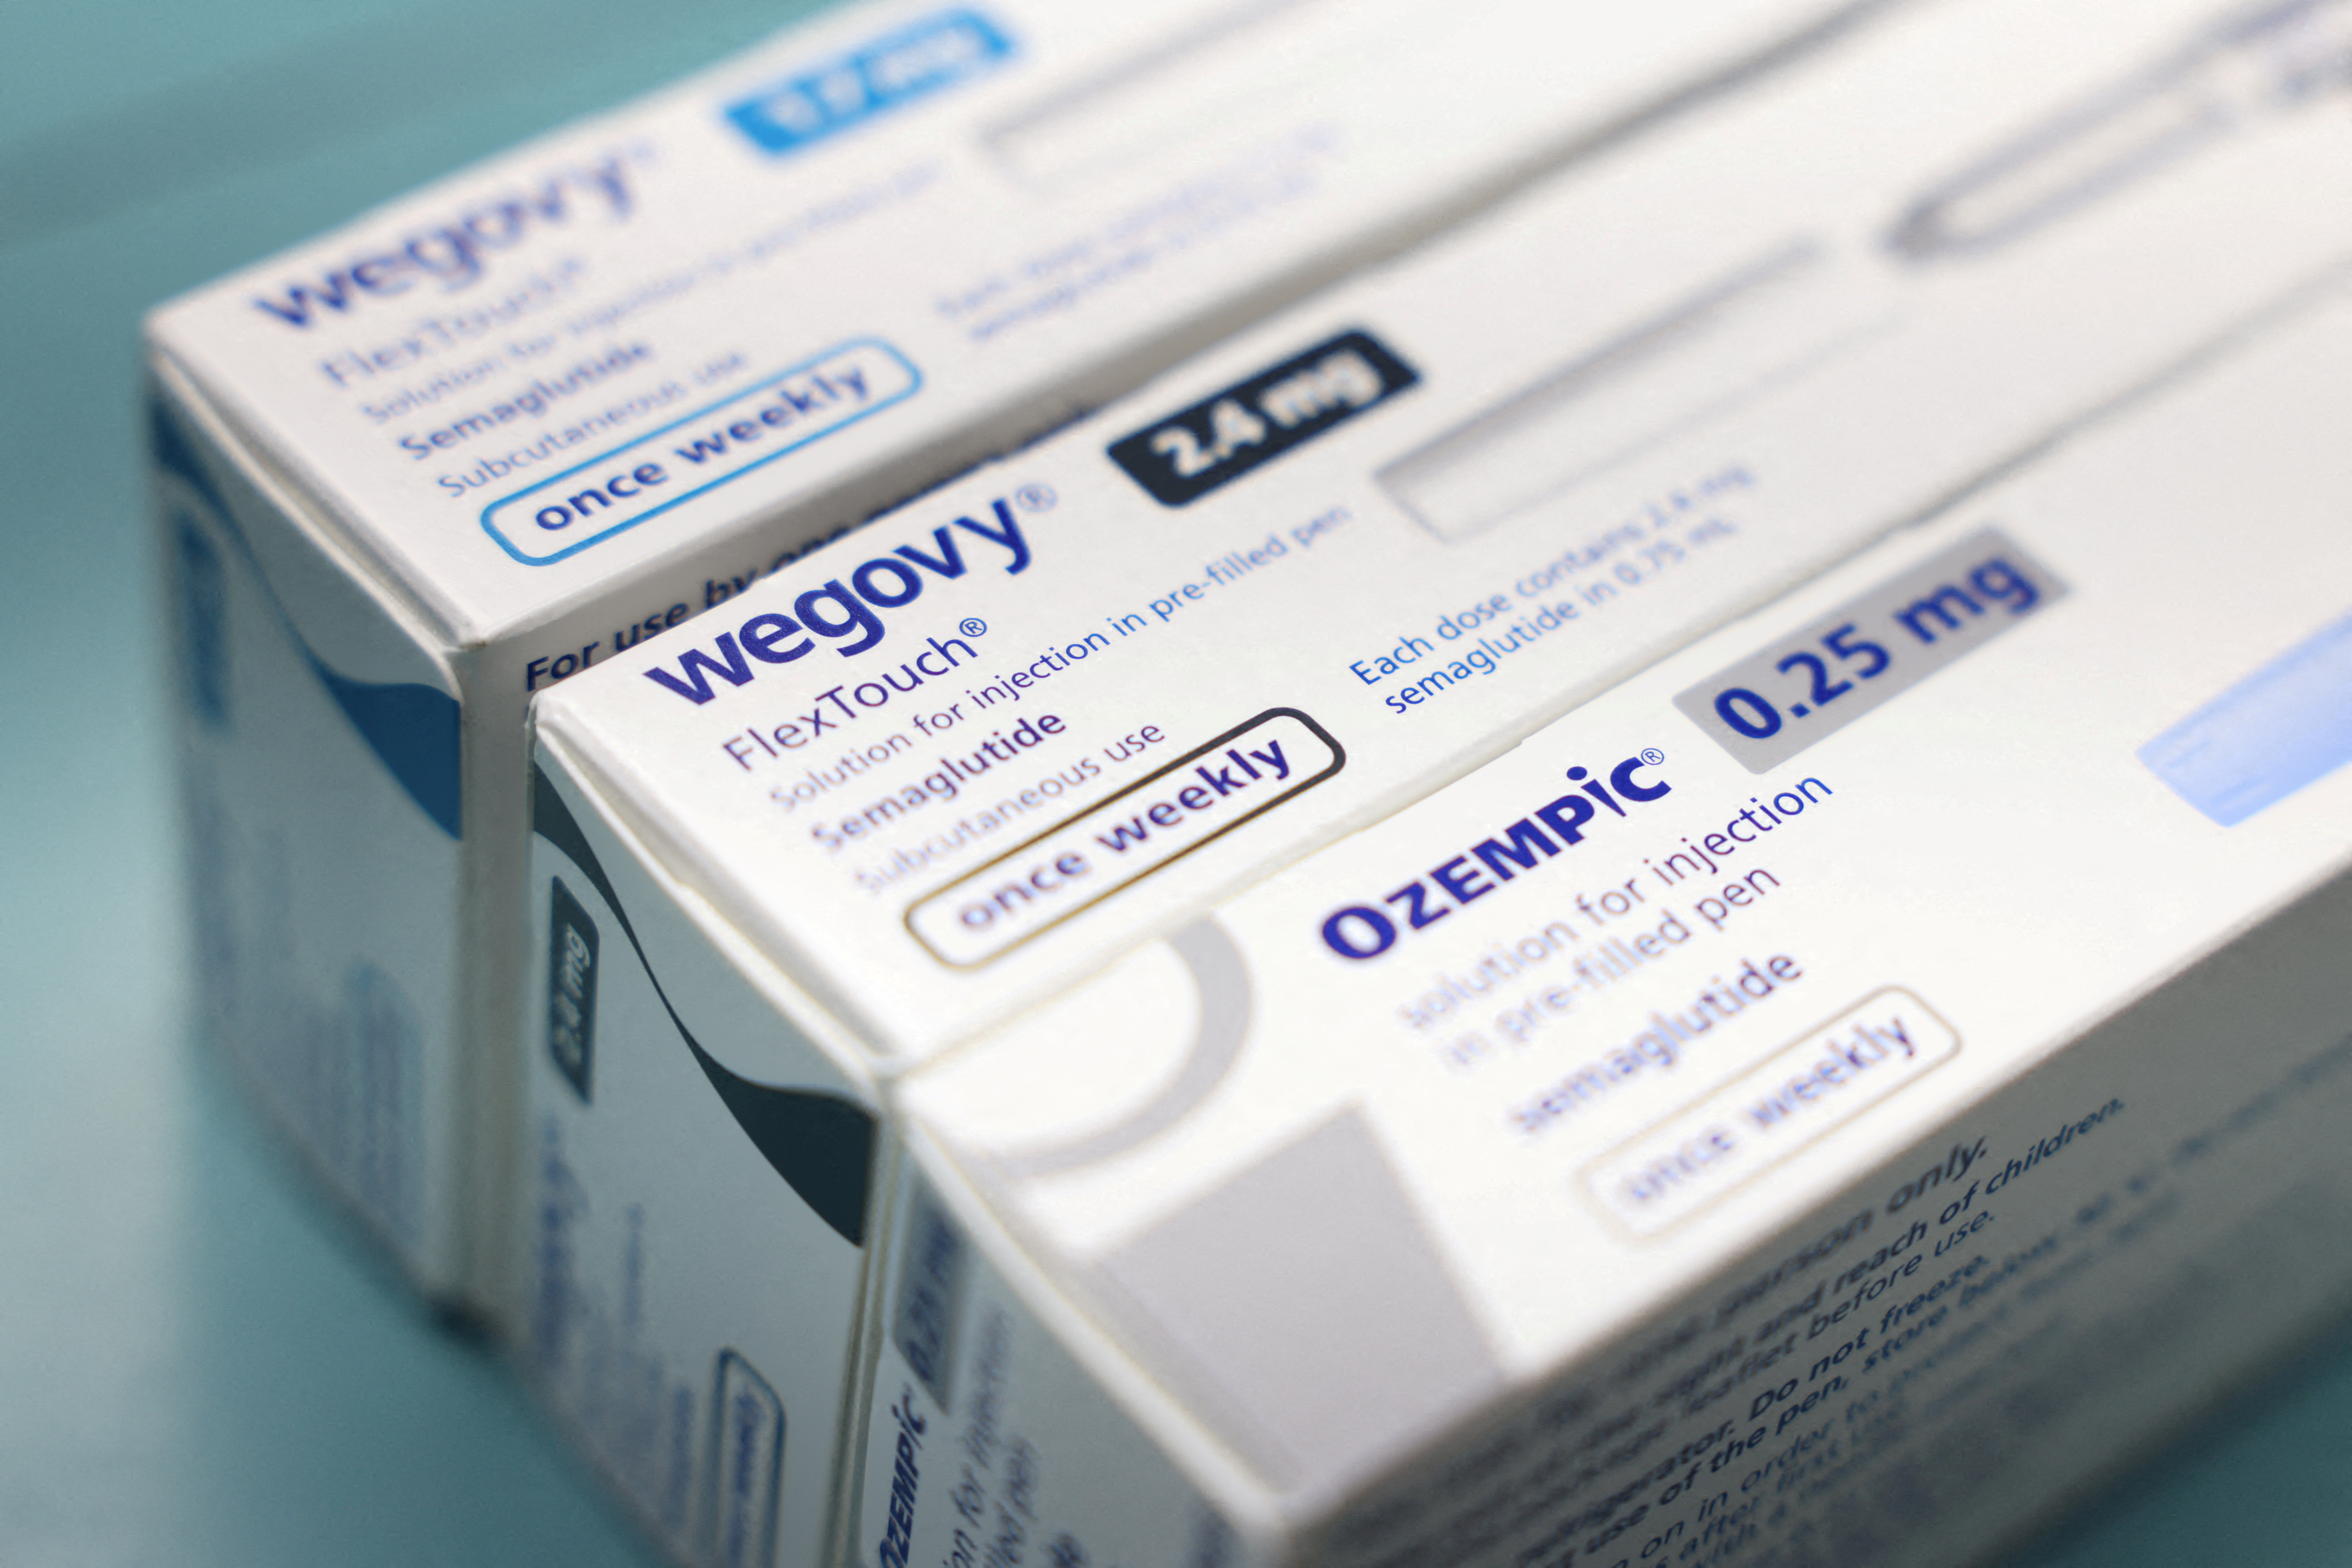 Boxes of Ozempic and Wegovy made by Novo Nordisk are seen at a pharmacy in London